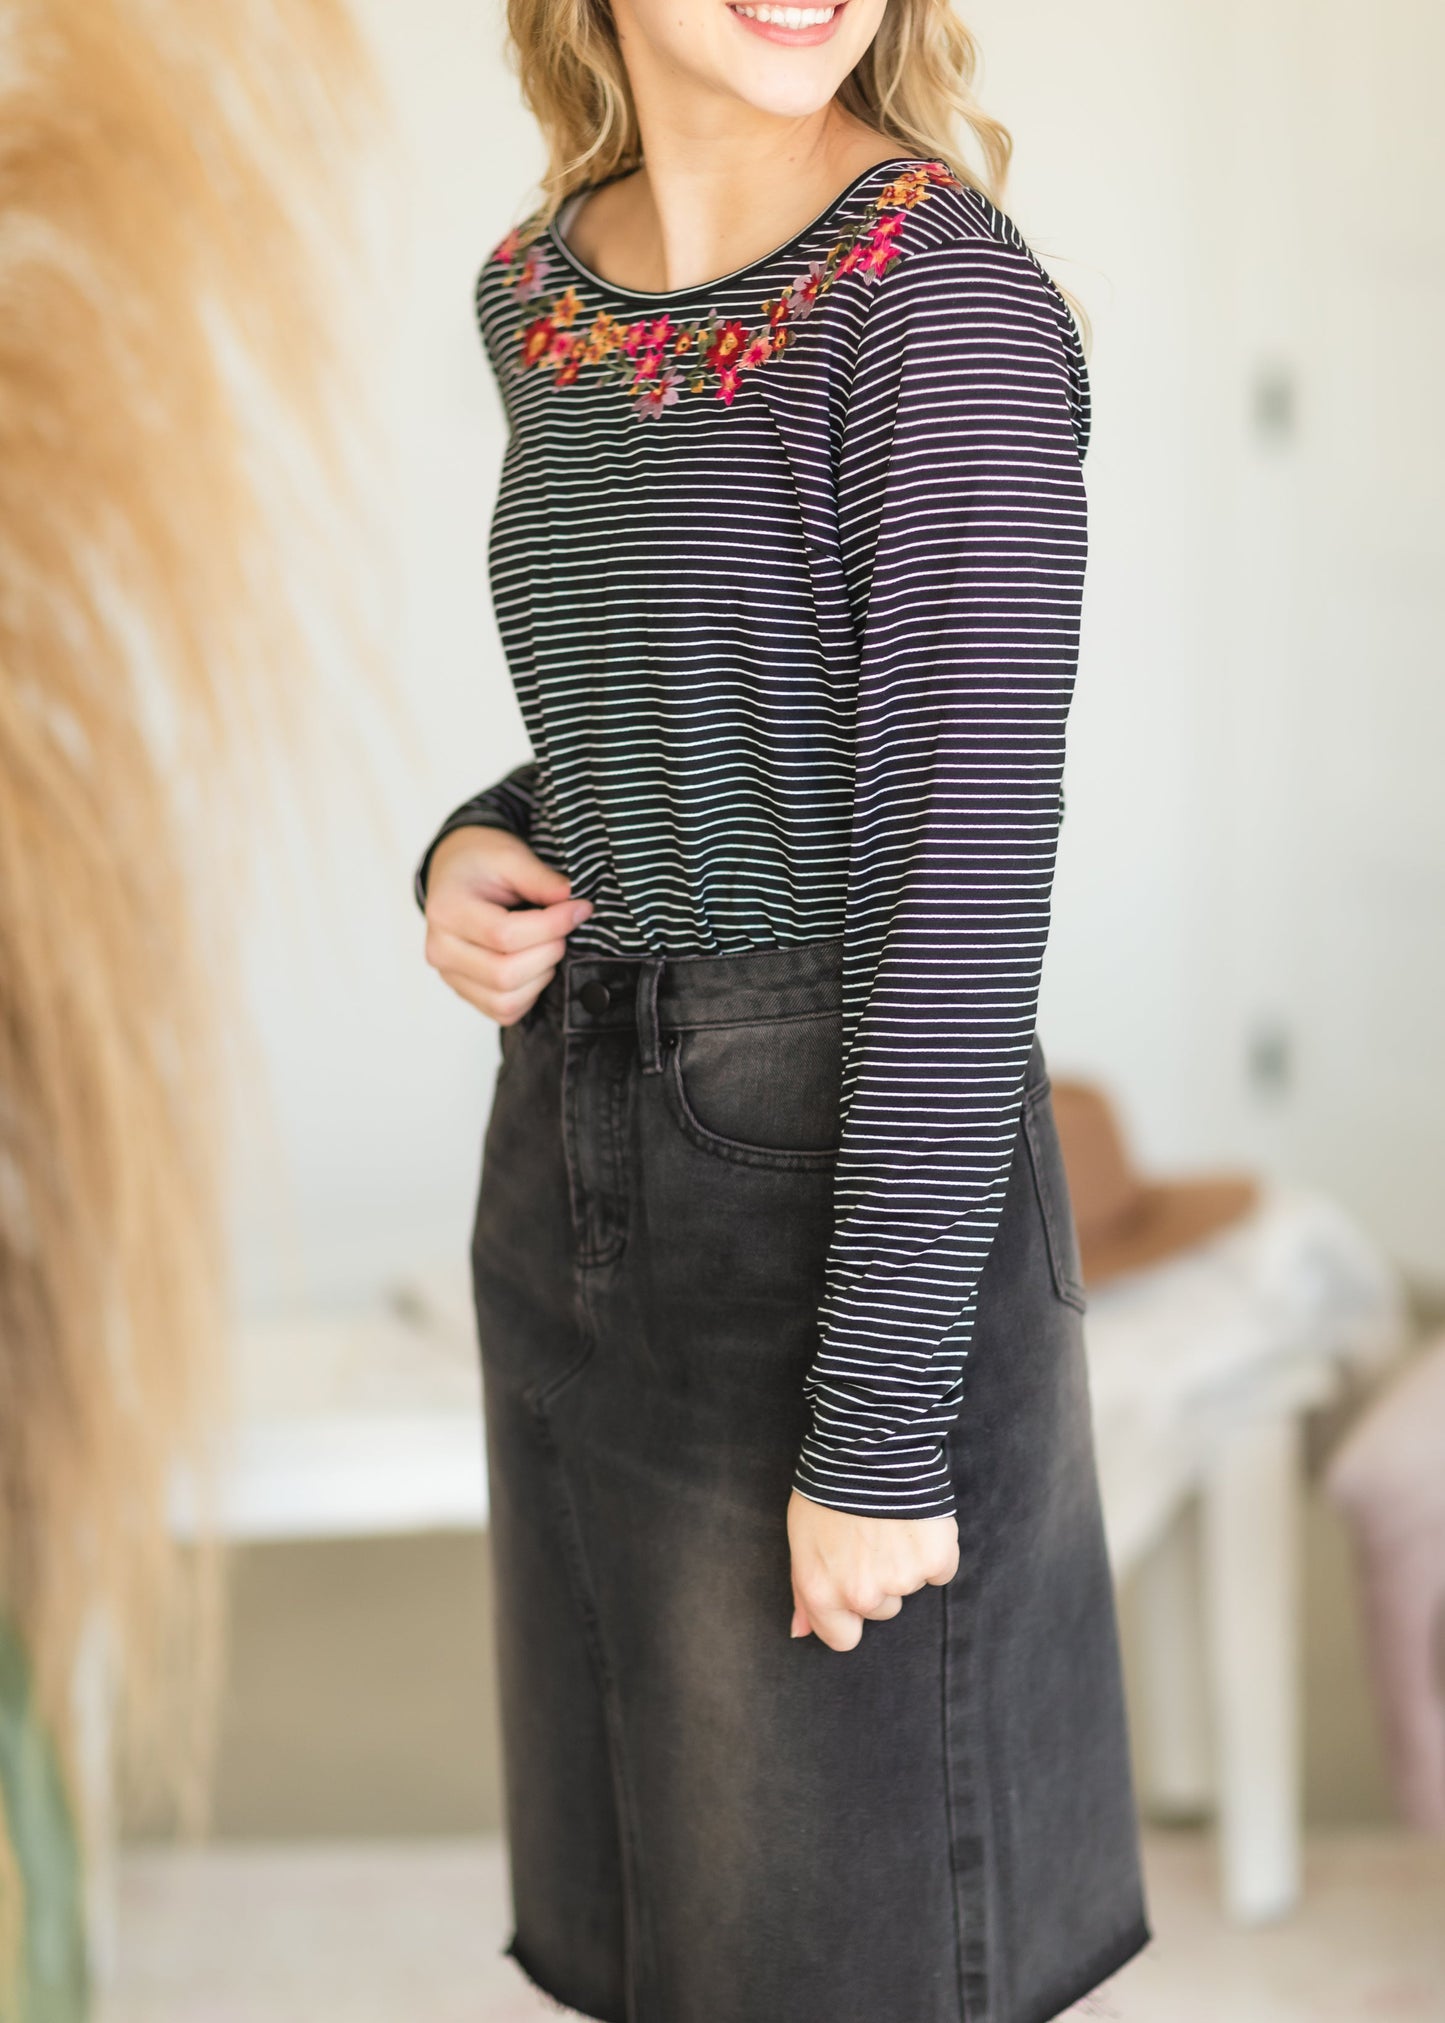 Black Striped Knit Embroidered Top - FINAL SALE Tops